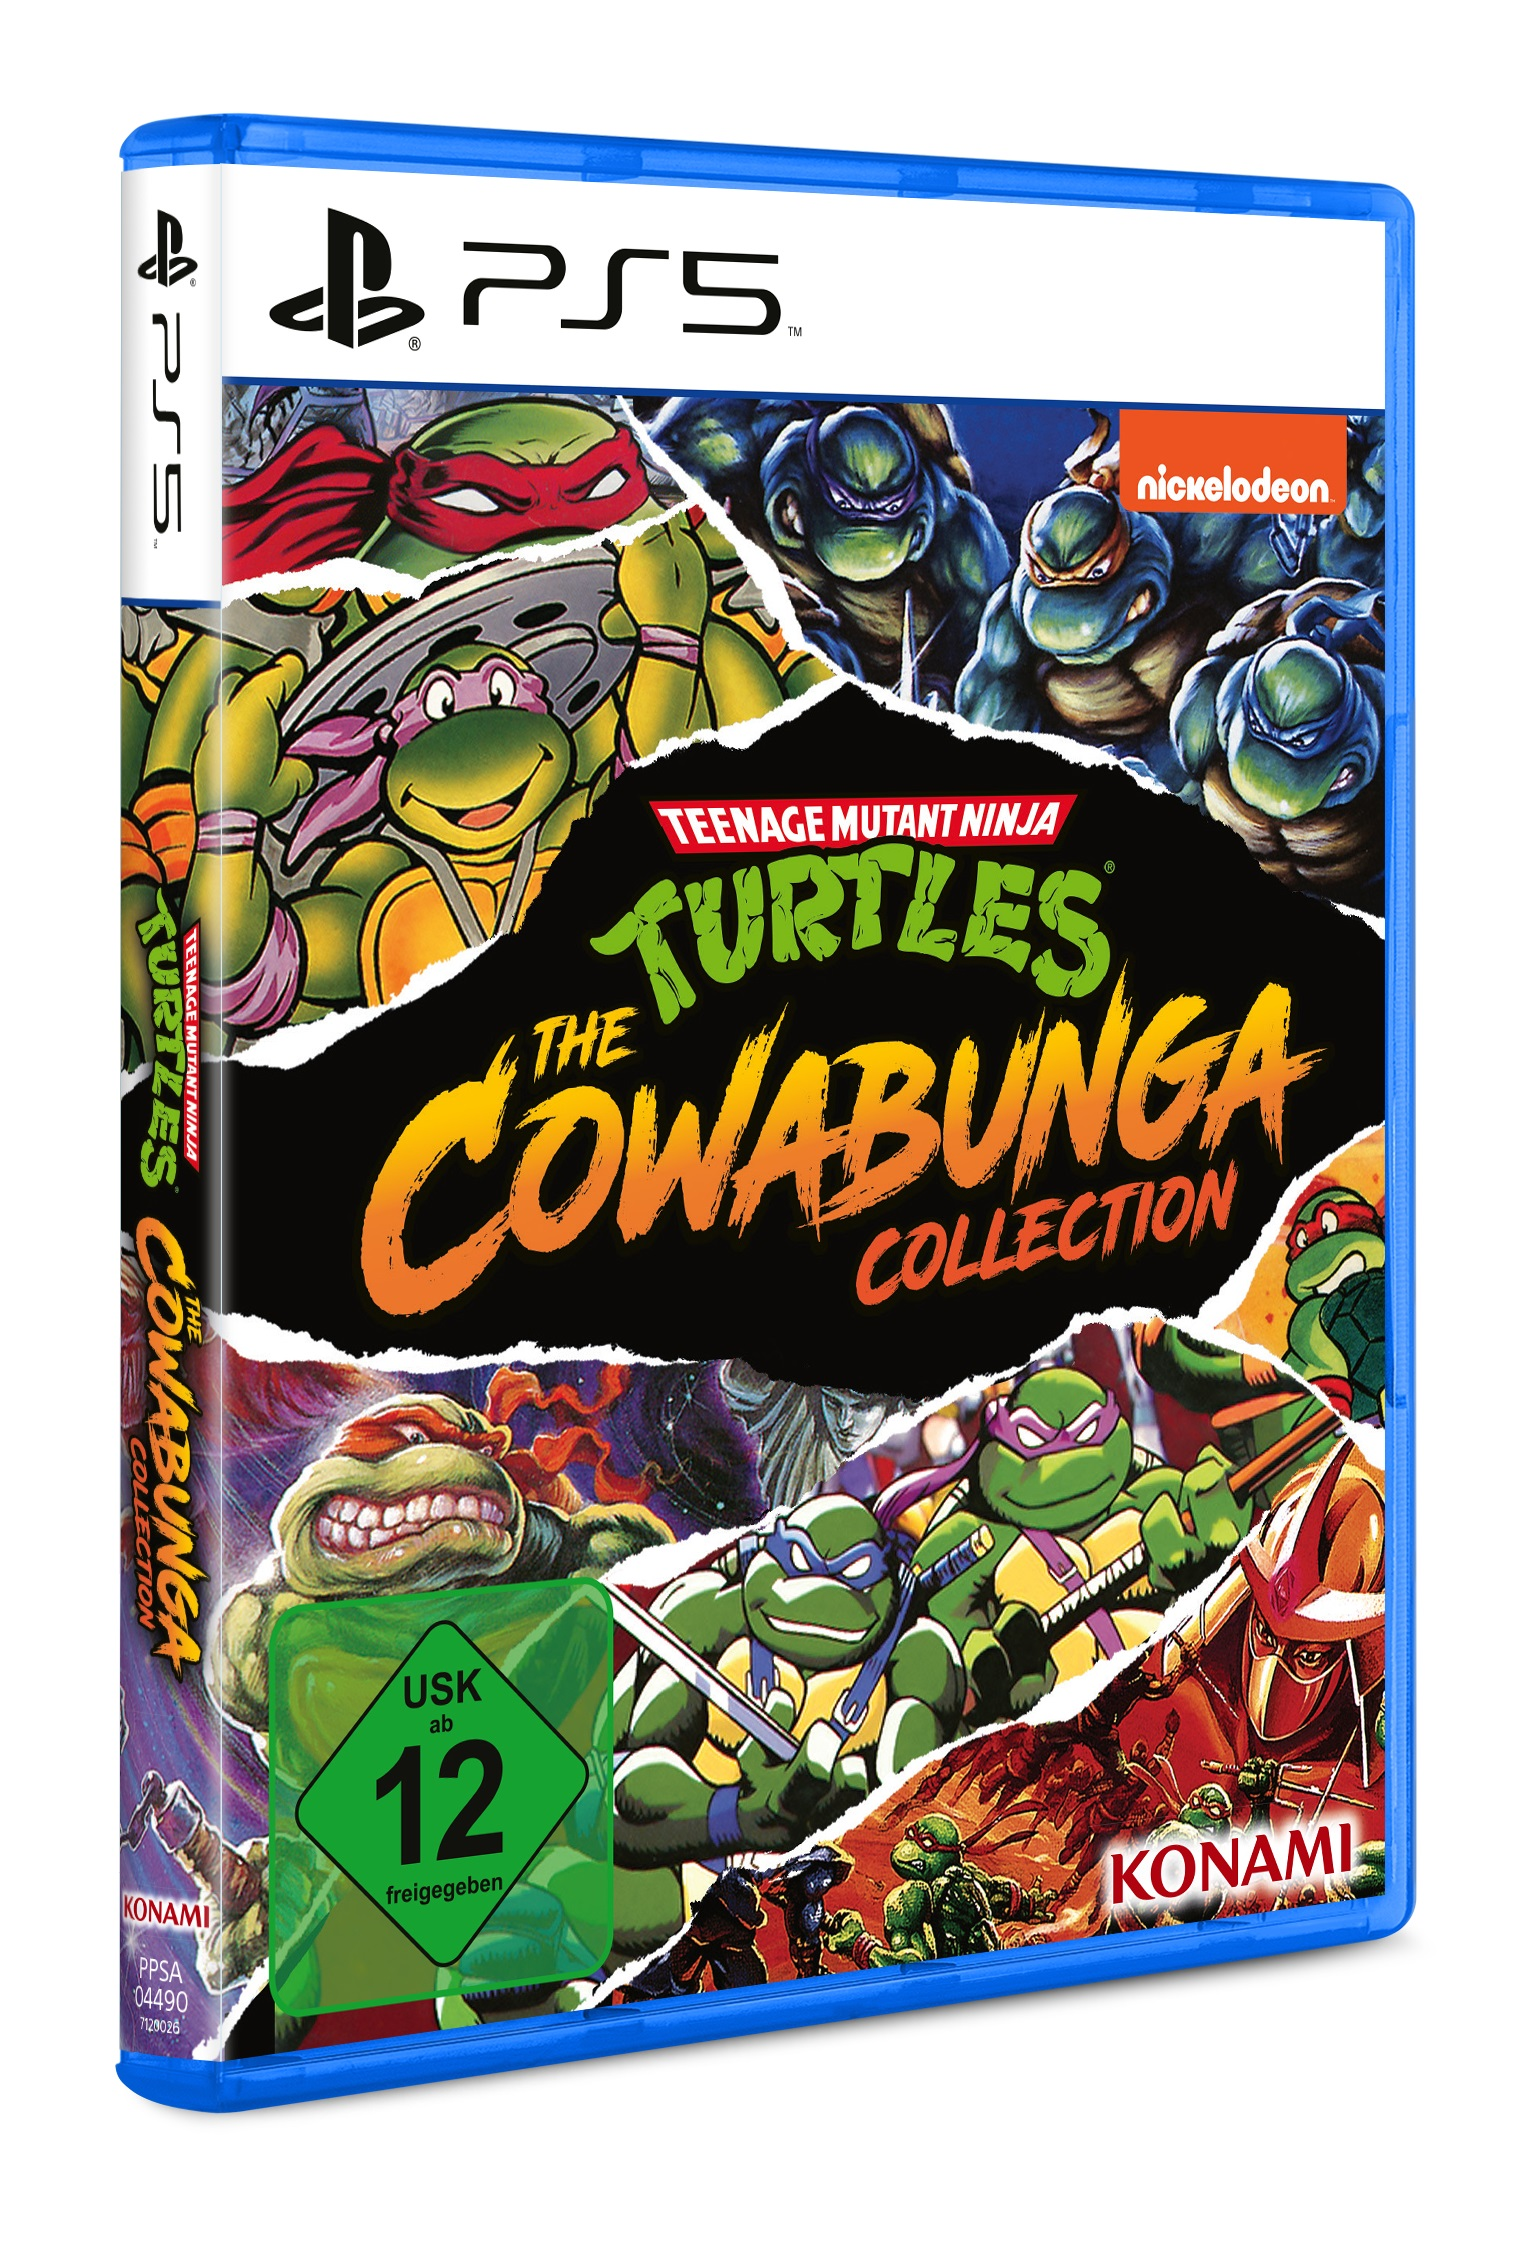 Collection Cowabunga [PlayStation The - 5] TMNT -